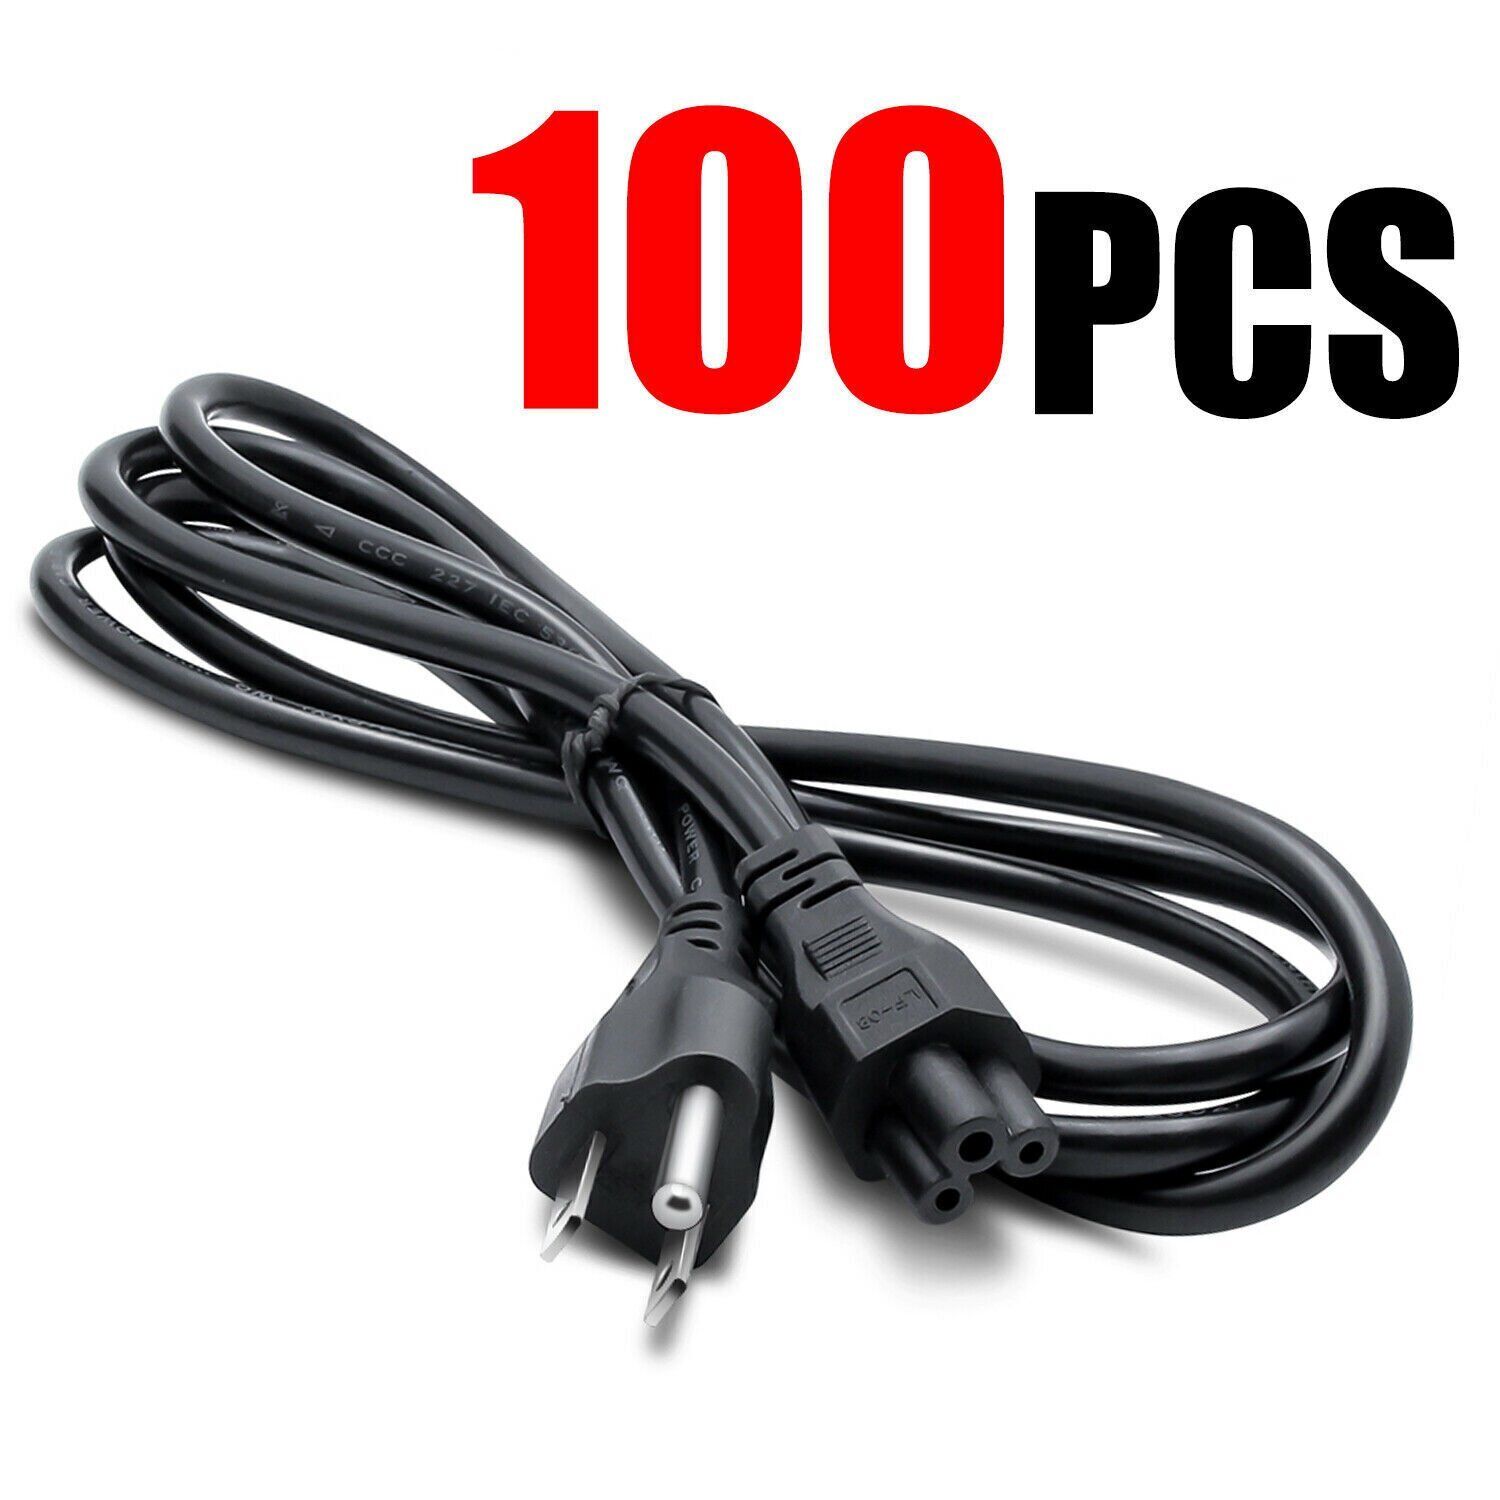 Lot of 100pcs 6ft PC 3-Prong Mickey Mouse AC Power Cord for Laptop, PC, Printers